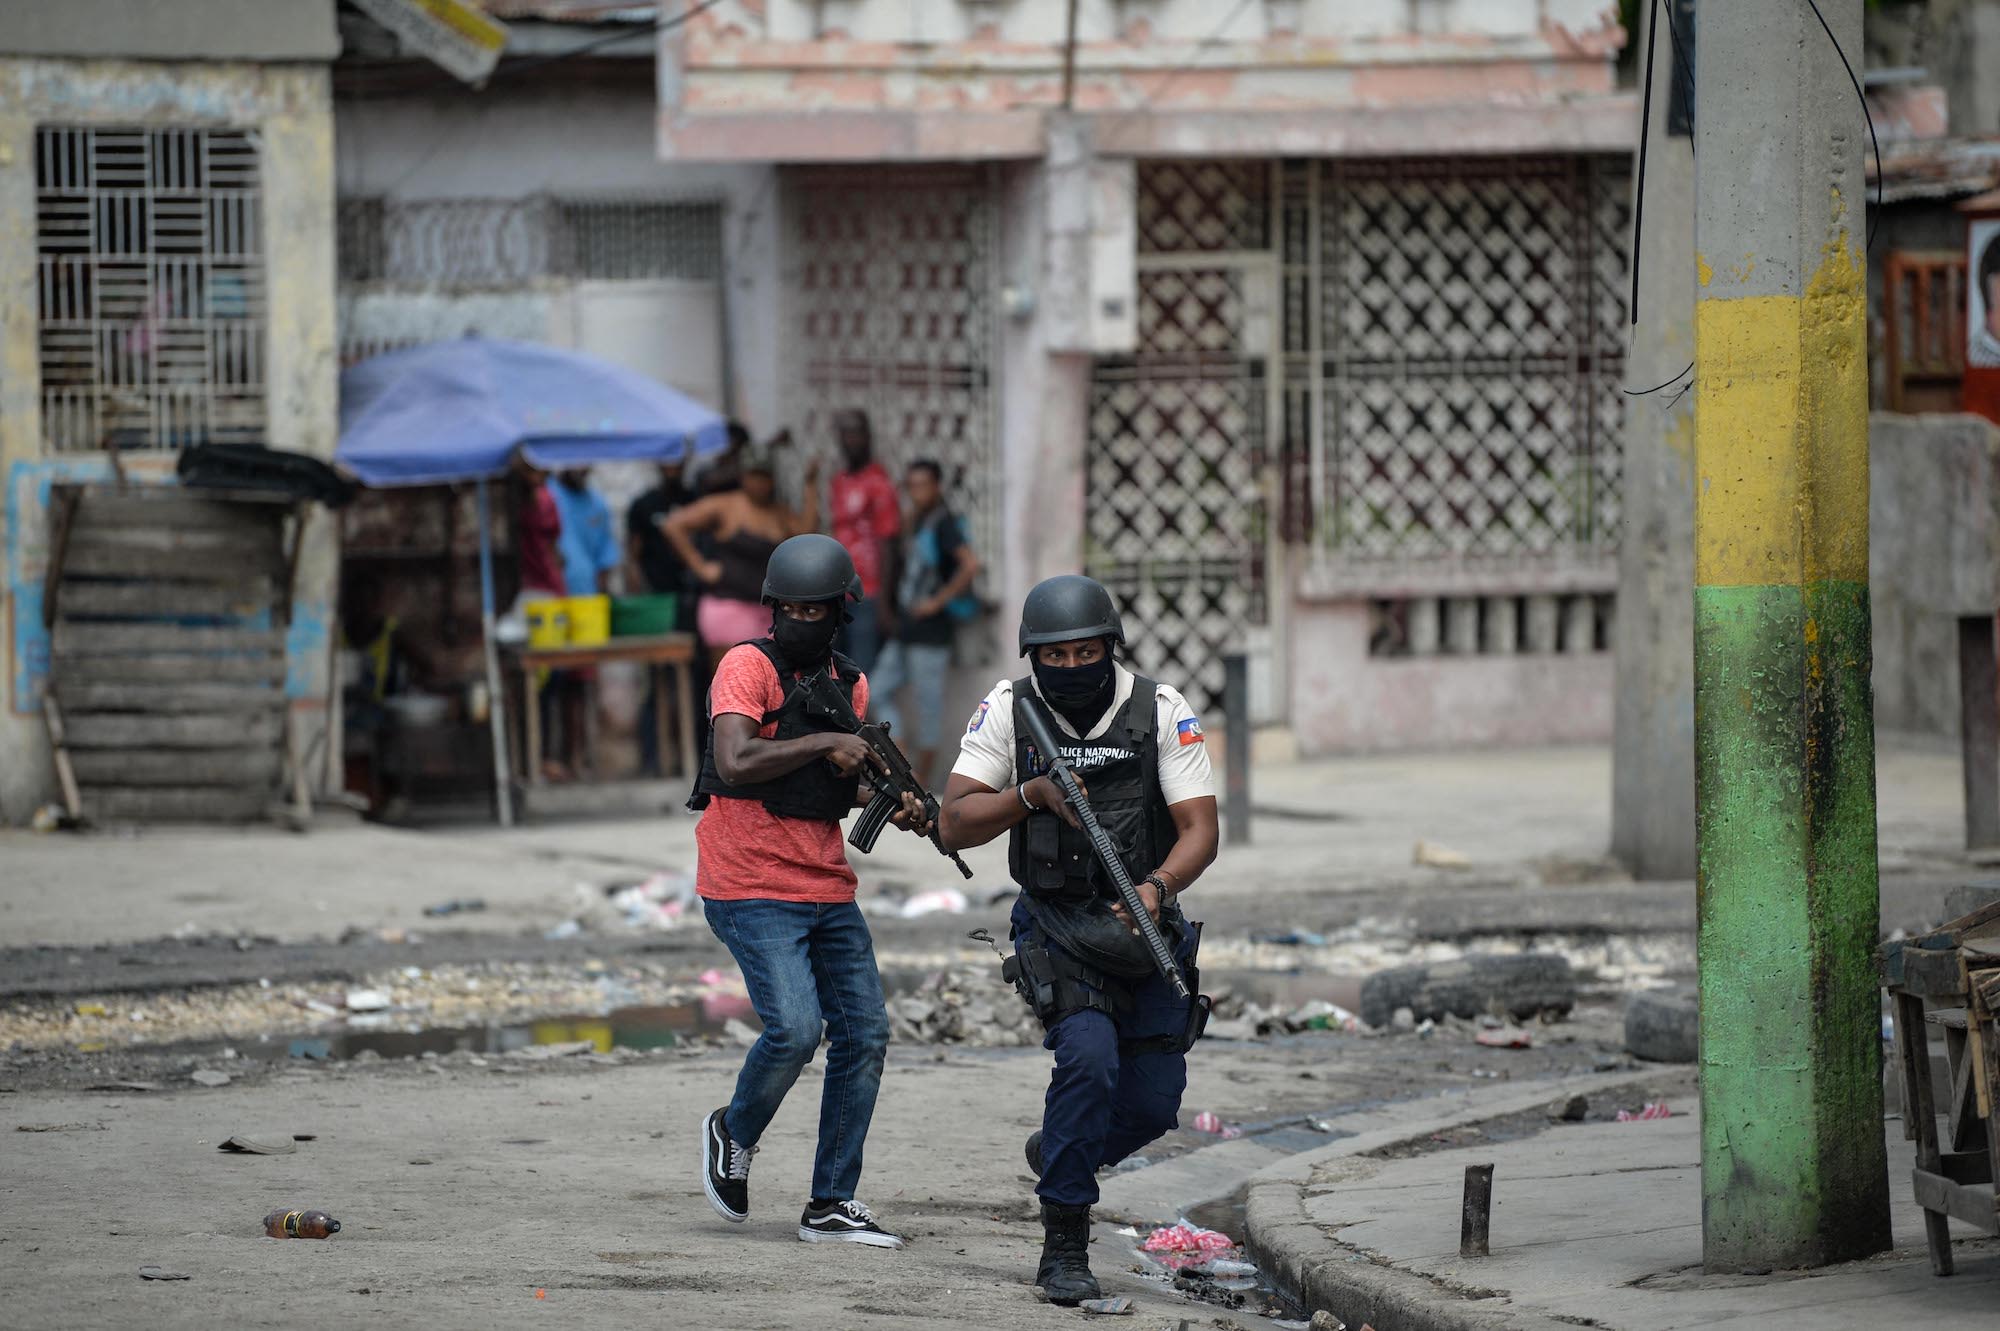 Warring gangs control much of Haiti's capital city and main port